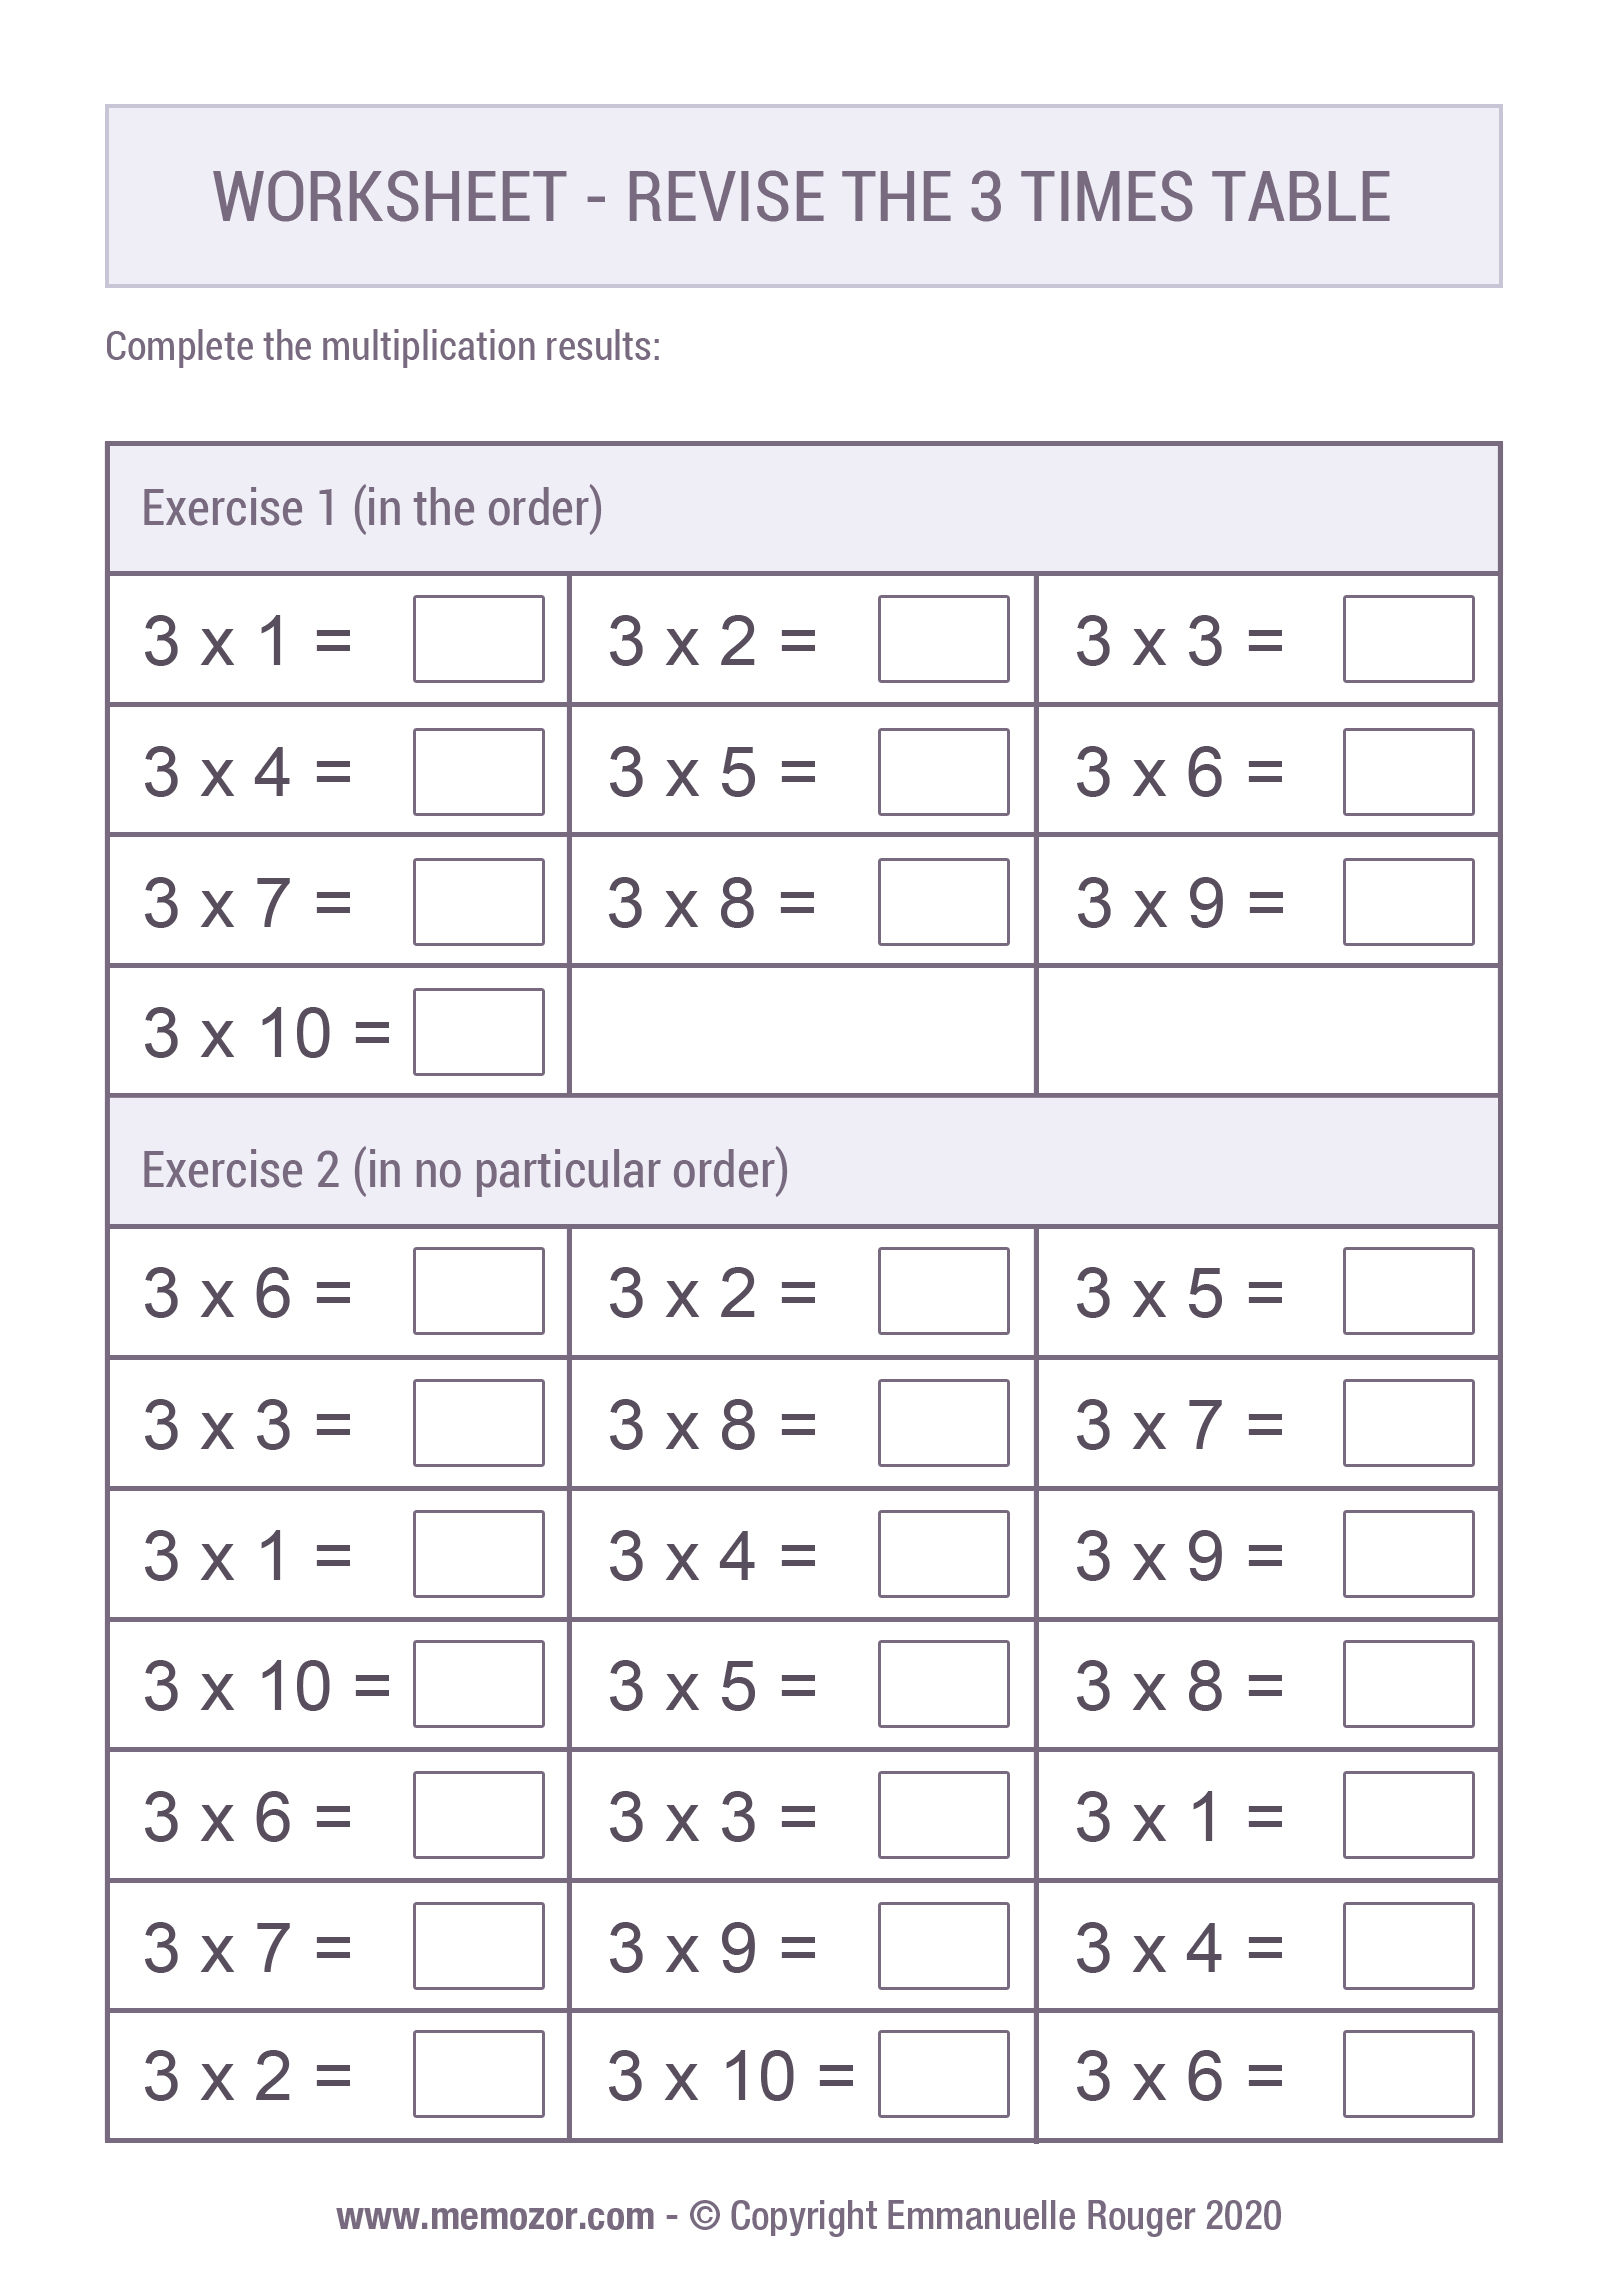 Printable Worksheet - Revise the 21 Times table  Memozor Within 3 Times Table Worksheet